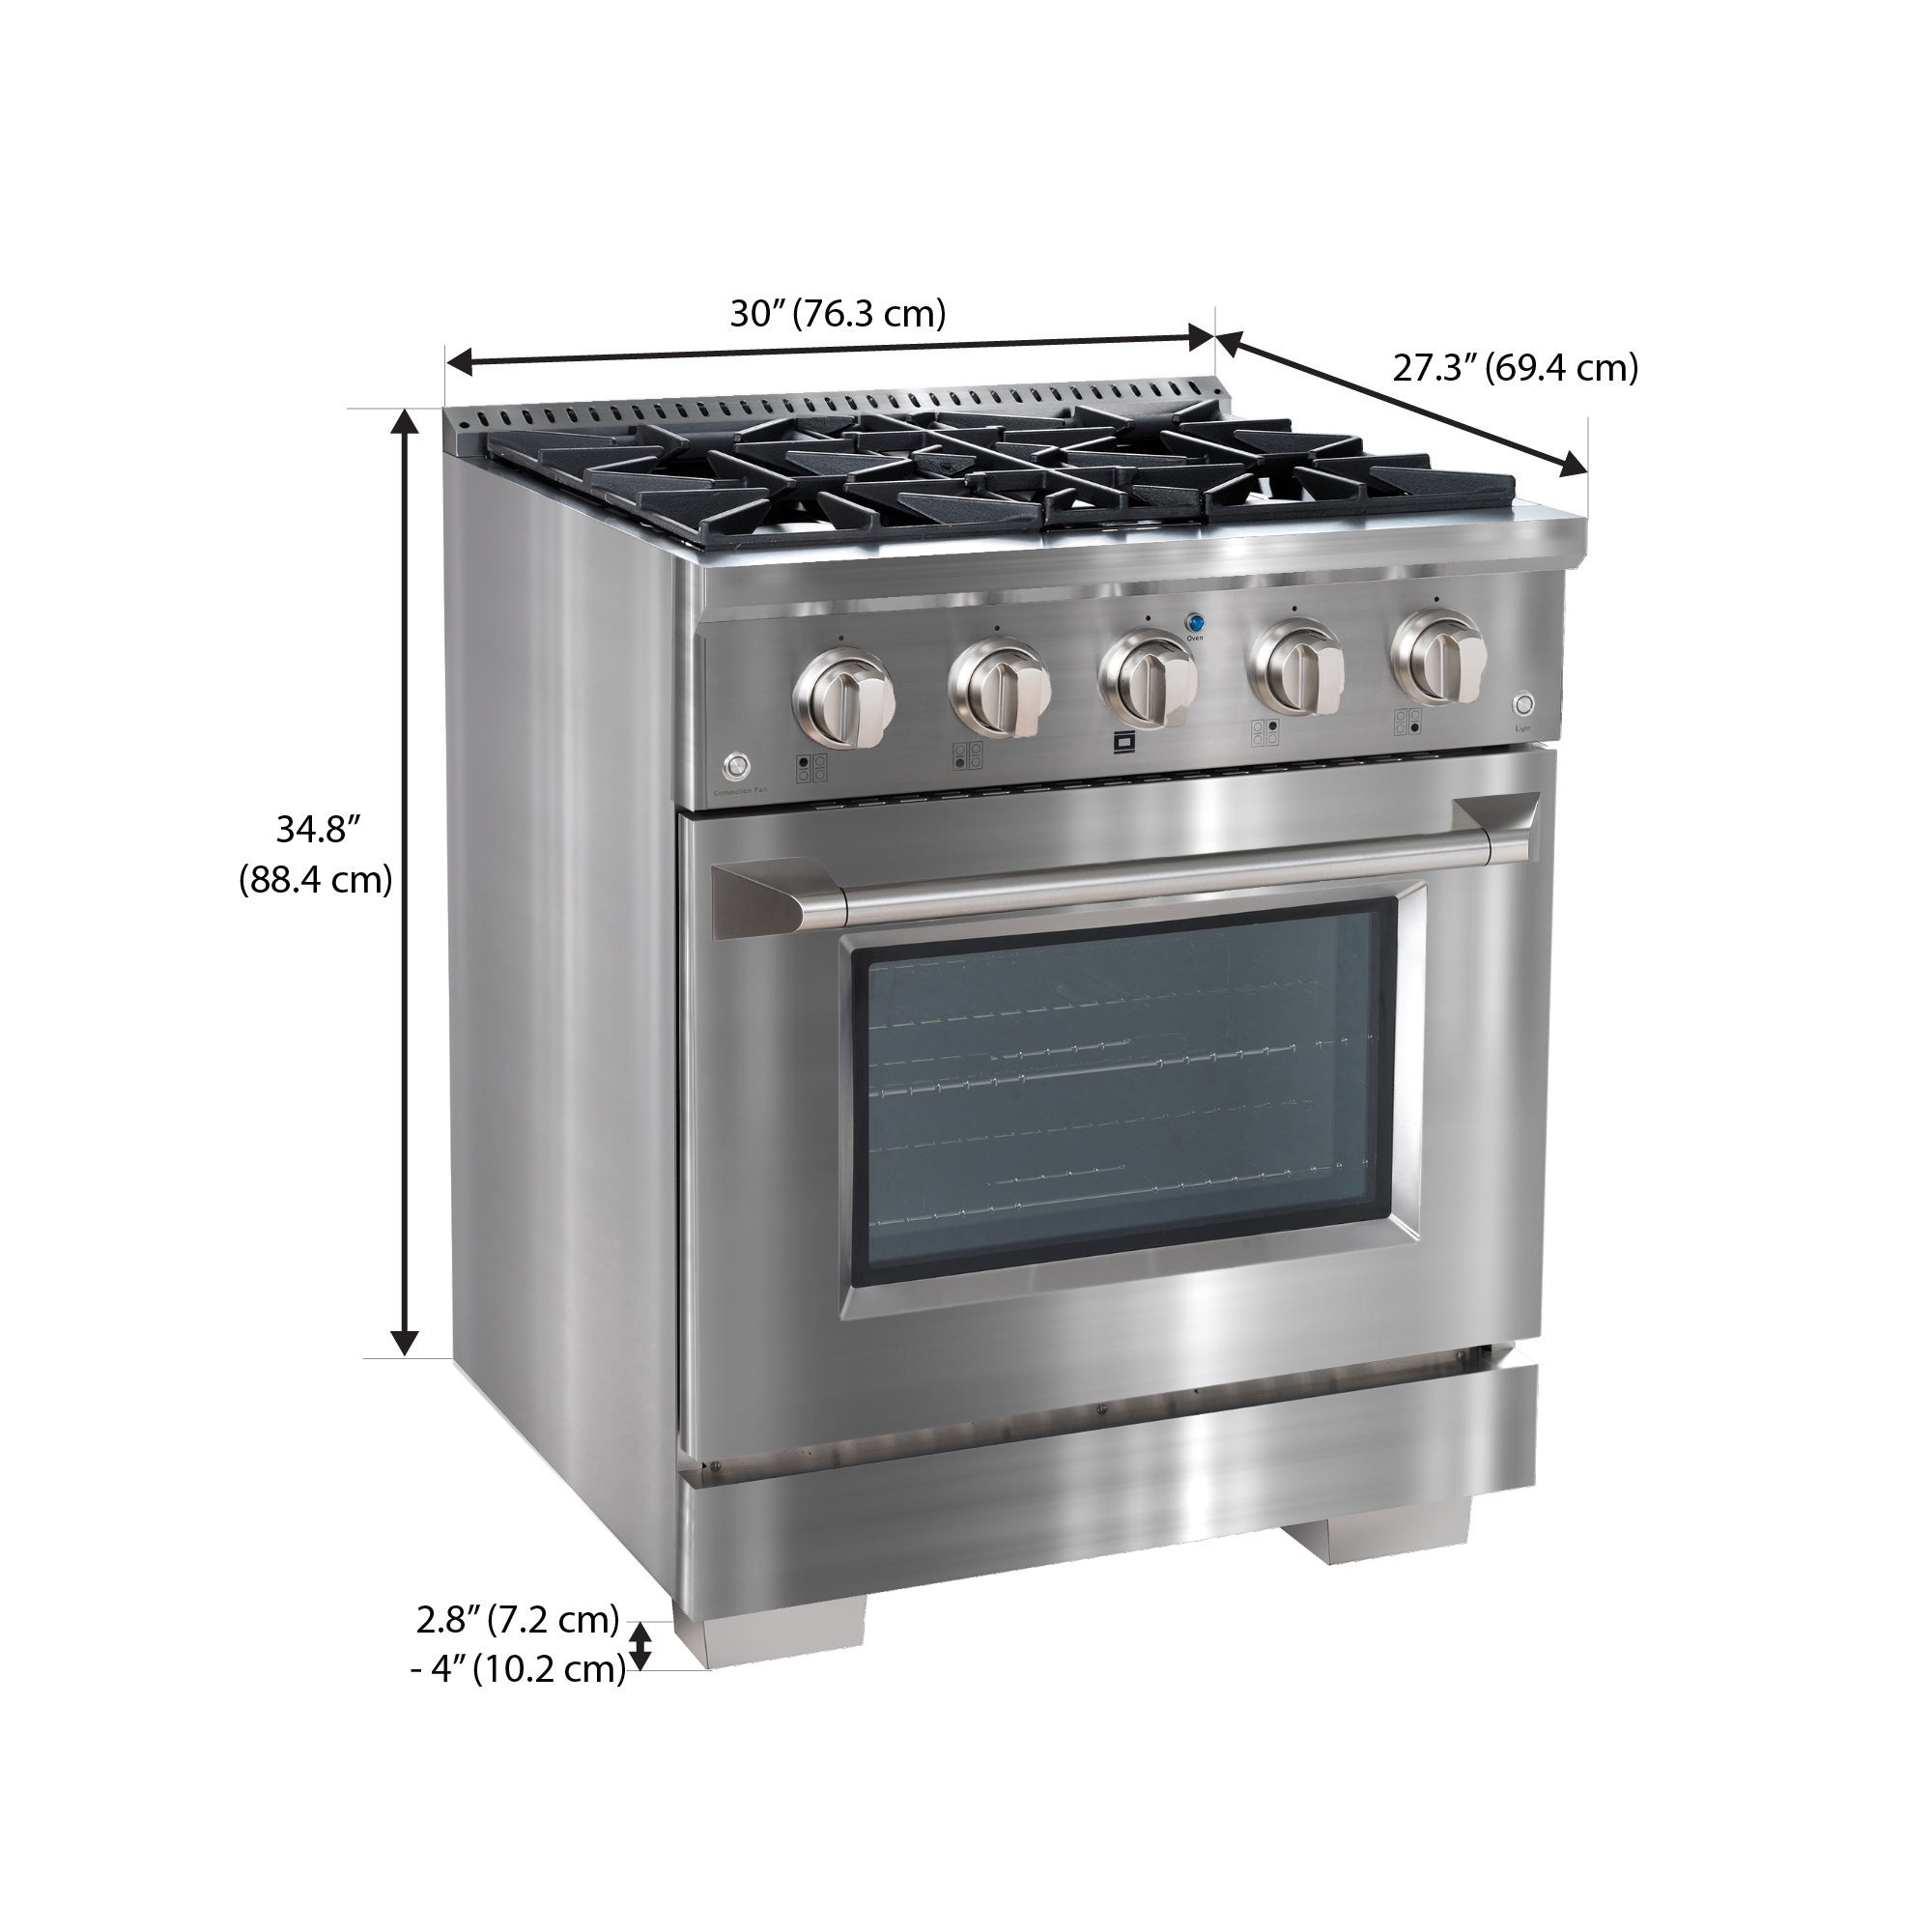 Ancona 2-piece Kitchen Appliance Package with 30